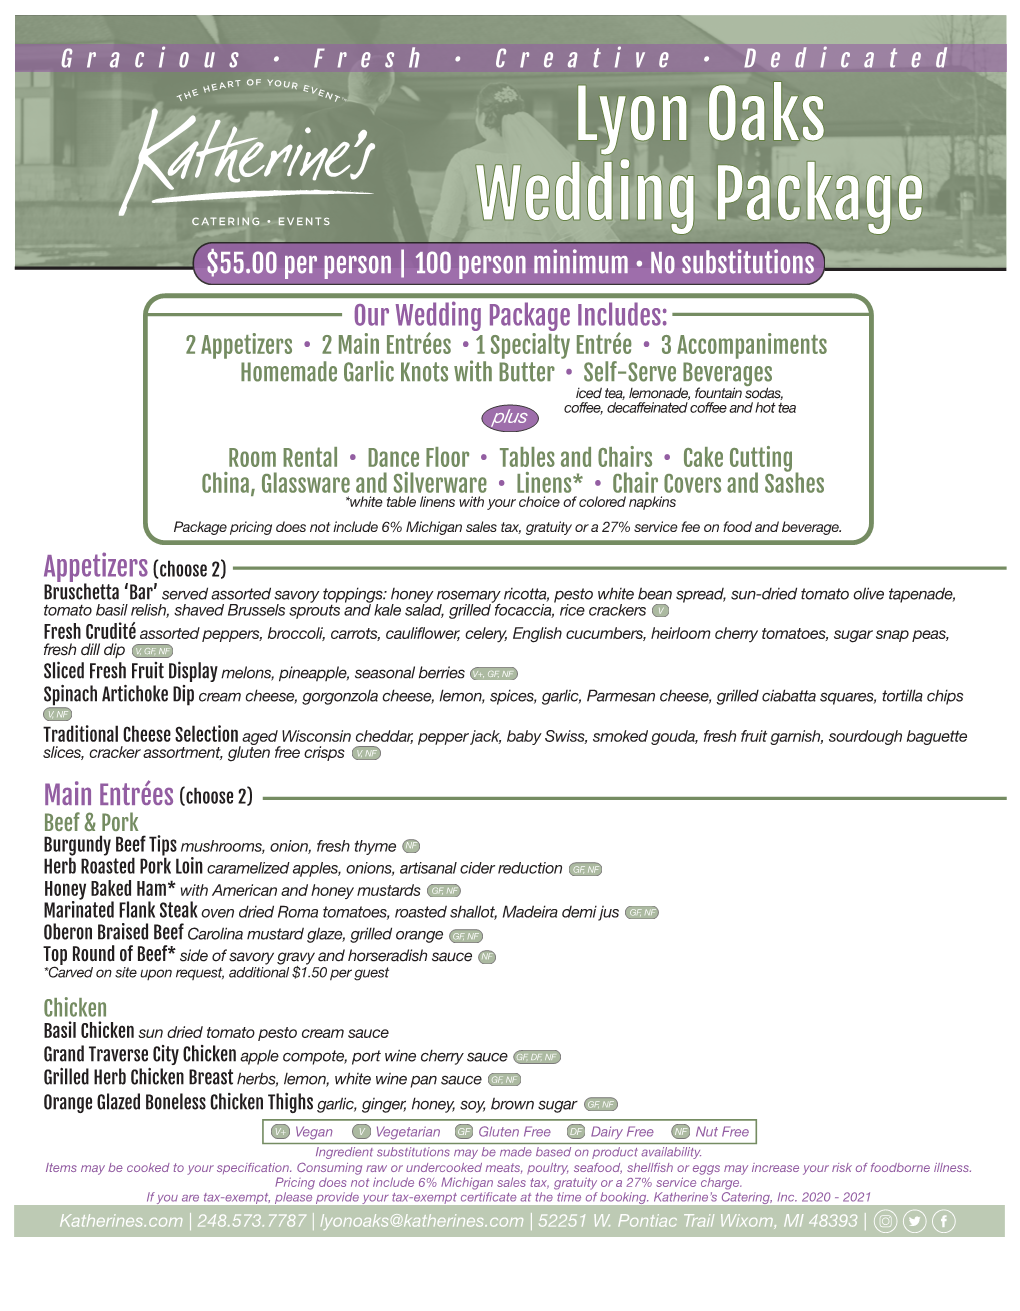 Lyon Oaks Wedding Package $55.00 Per Person | 100 Person Minimum • No Substitutions